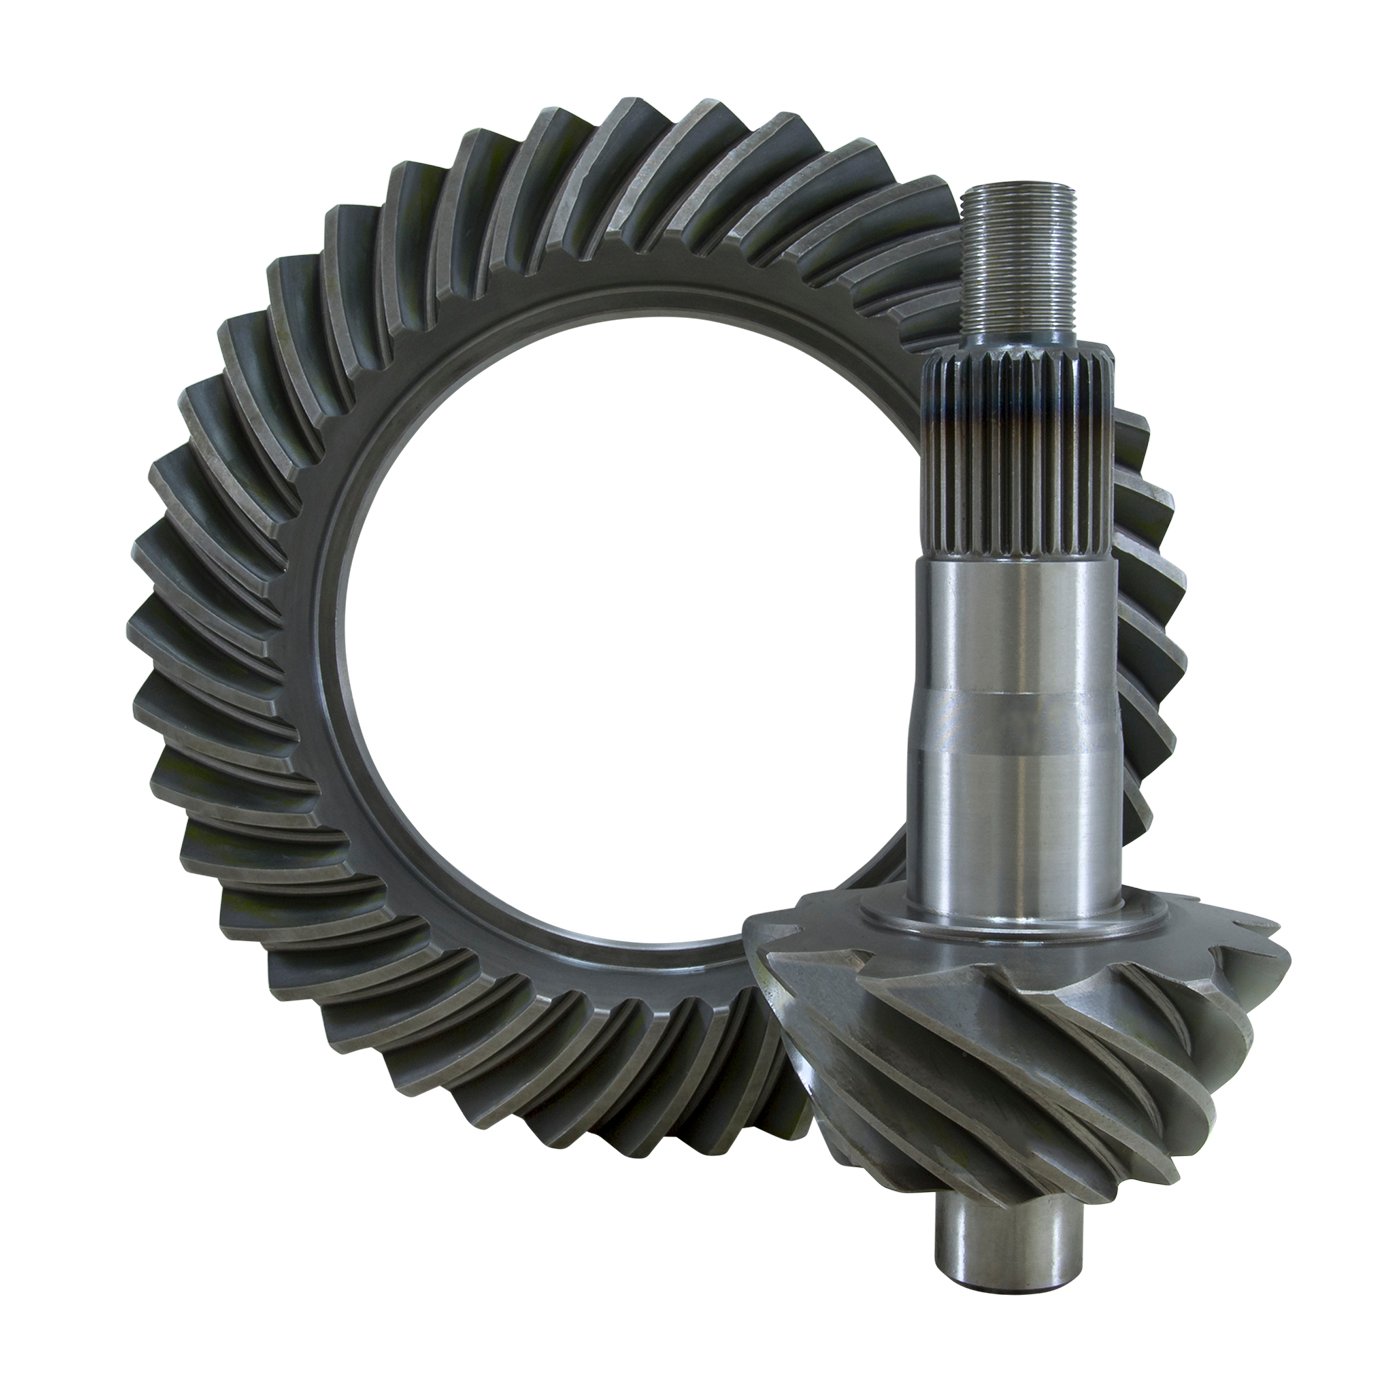 USA Standard 36188 Ring & Pinion Set, For 10.5 in. GM 14 Bolt Truck, 5.38 Ratio, Thick